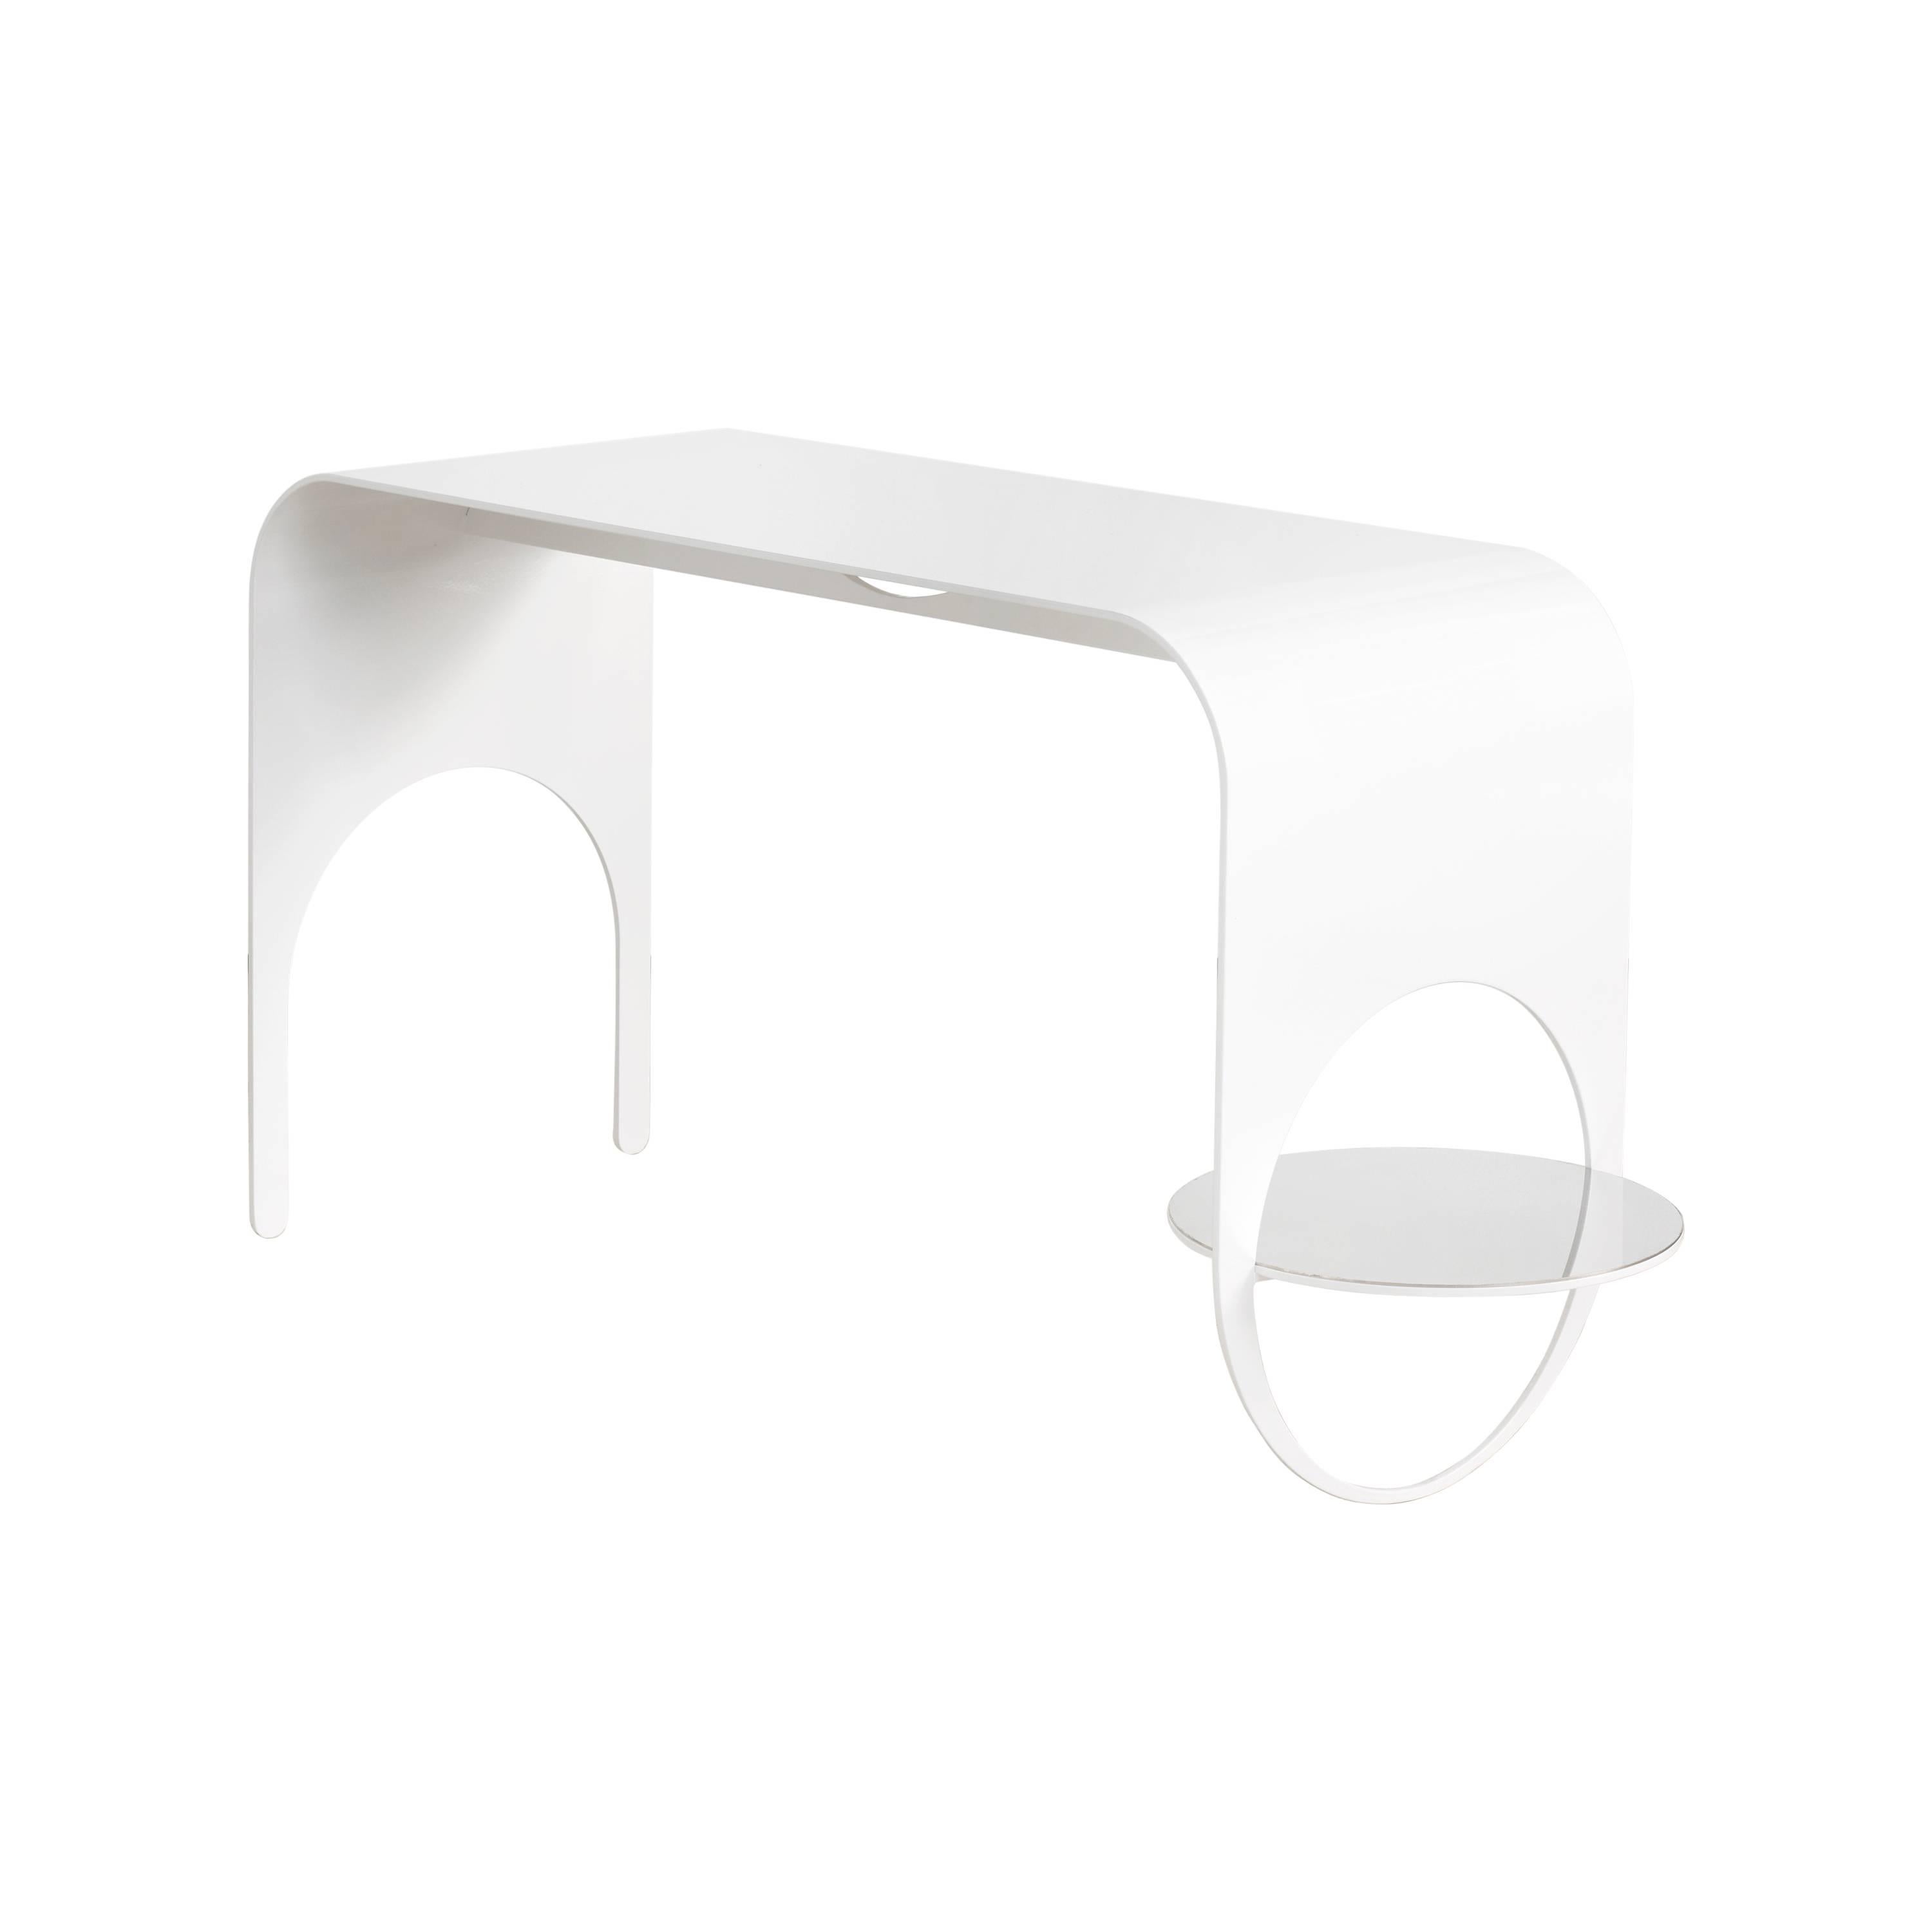 Thin Table 2 in Contemporary White Powder Coated Steel and Polished Steel Shelf For Sale